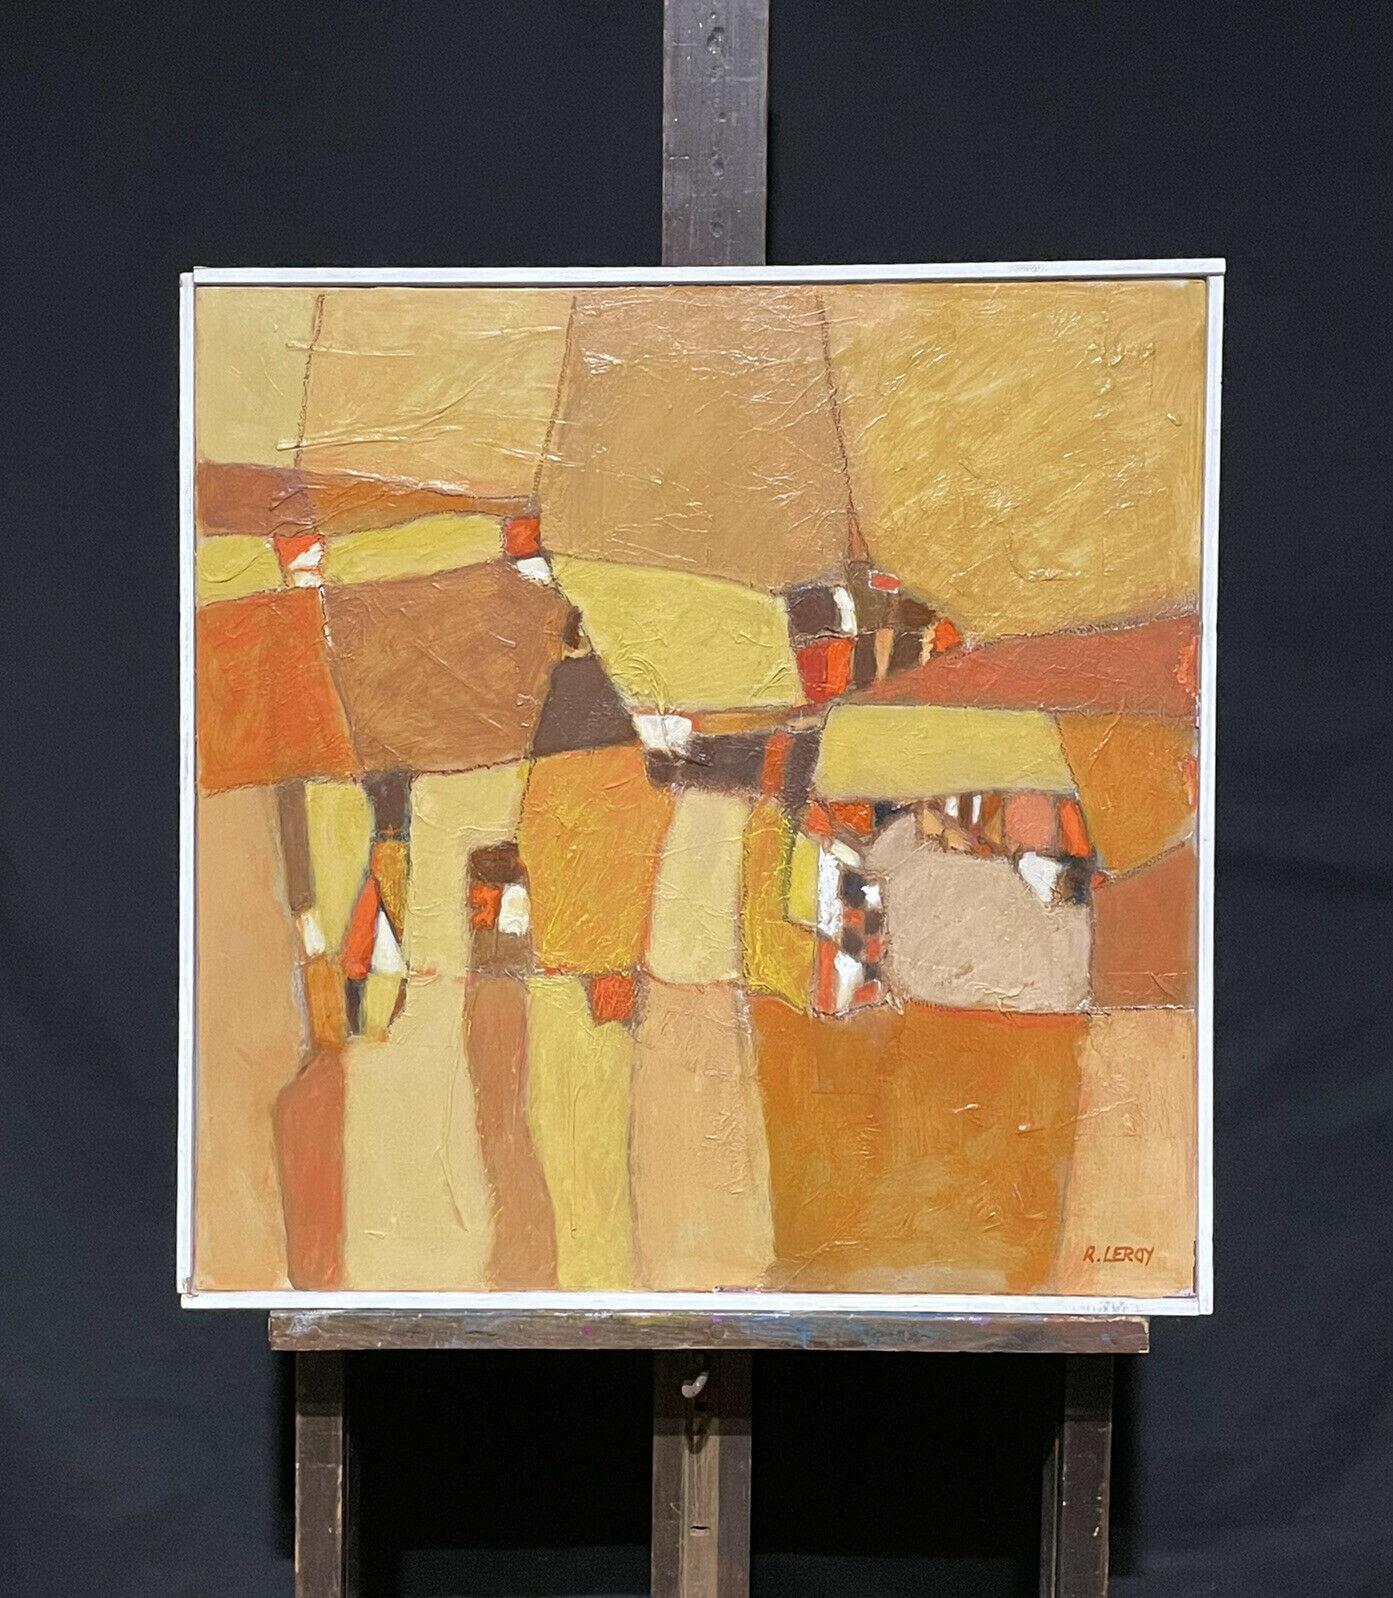 LARGE FRENCH CONTEMPORARY ABSTRACT CUBIST PAINTING - R. LEROY - OCHRE COLORS - Painting by R.Leroy